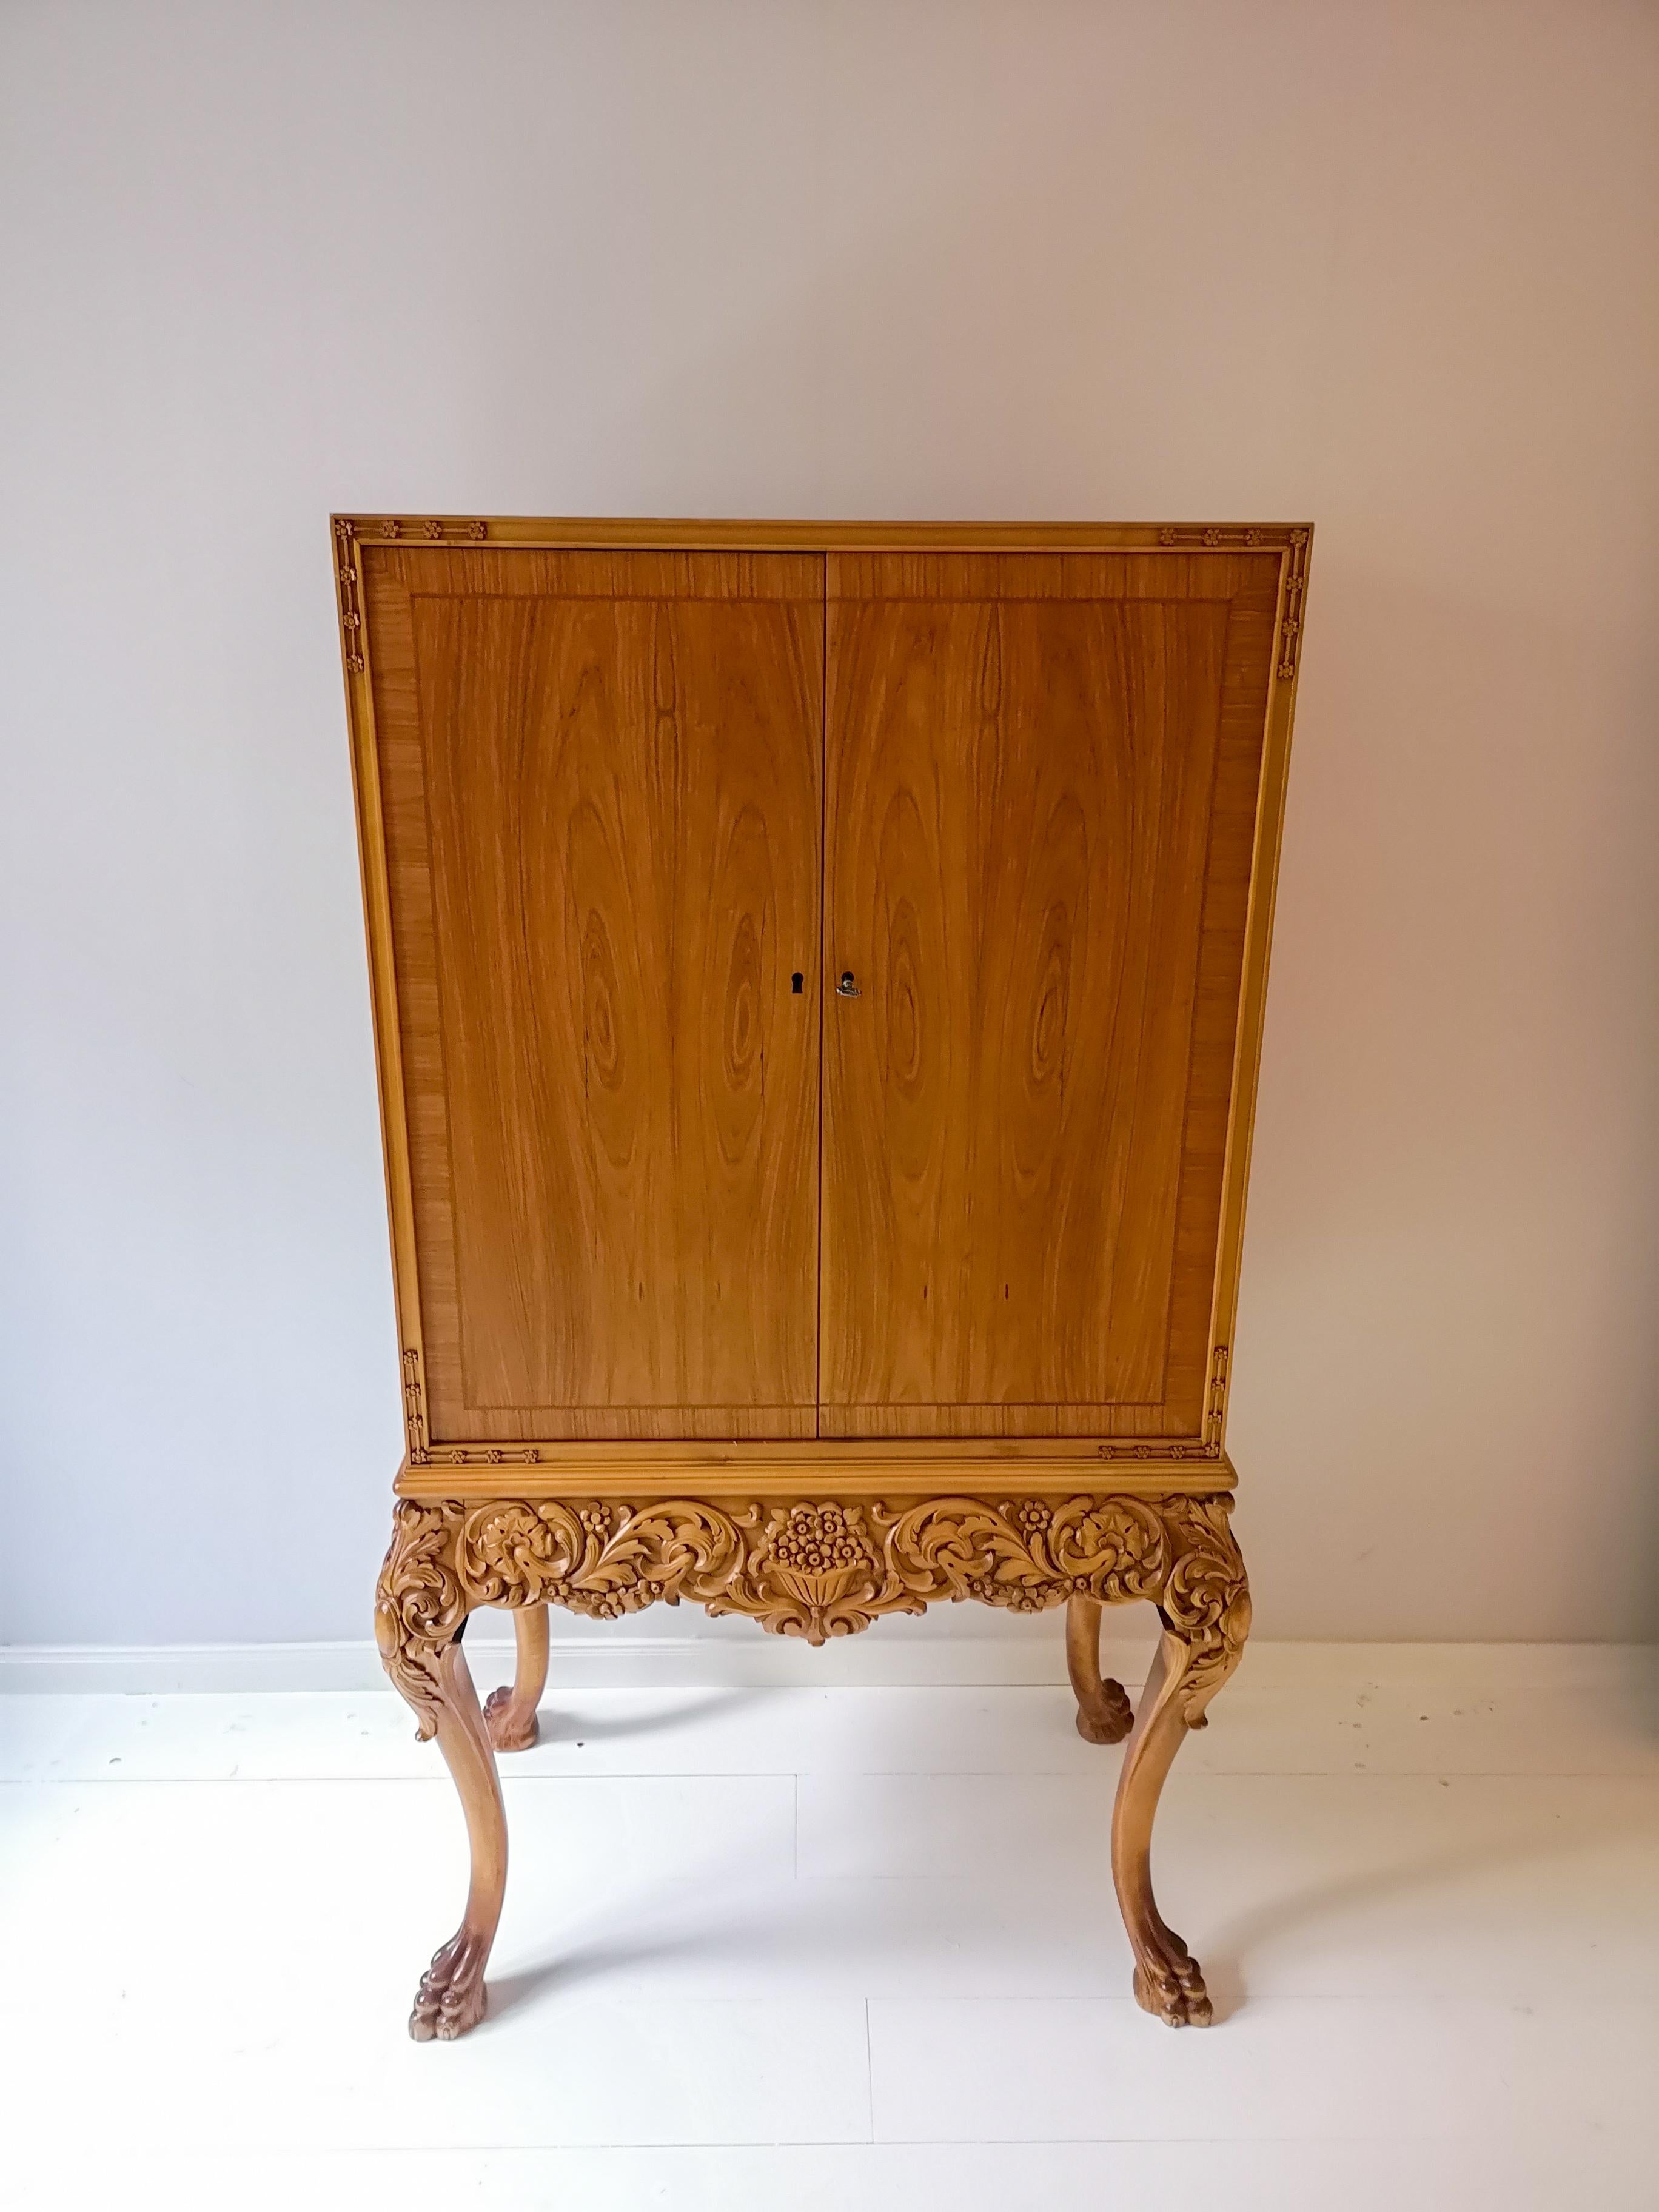 This wonderful handcrafted cabinet is made from elm veneer. Excellent carved and curved legs as well as wonderfully veneer that gives this cabinet a luxury’s feeling.

Good vintage condition. 

Measures: H 150, W 79, D 44 cm.
     